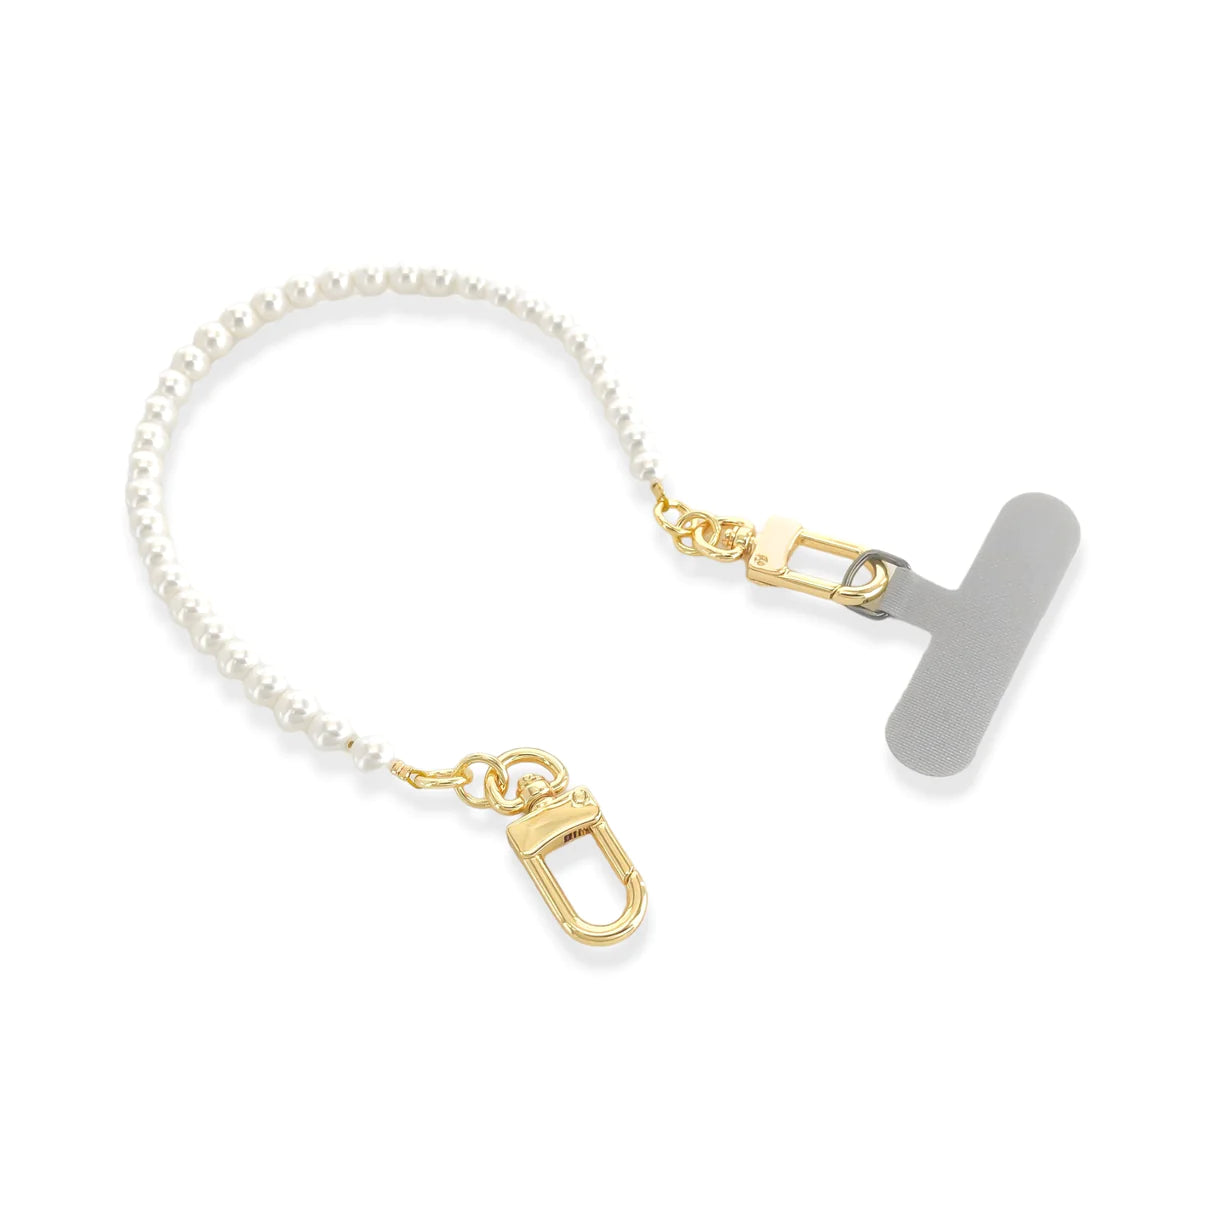 Faux Pearl Phone Chain - Wristlet Style